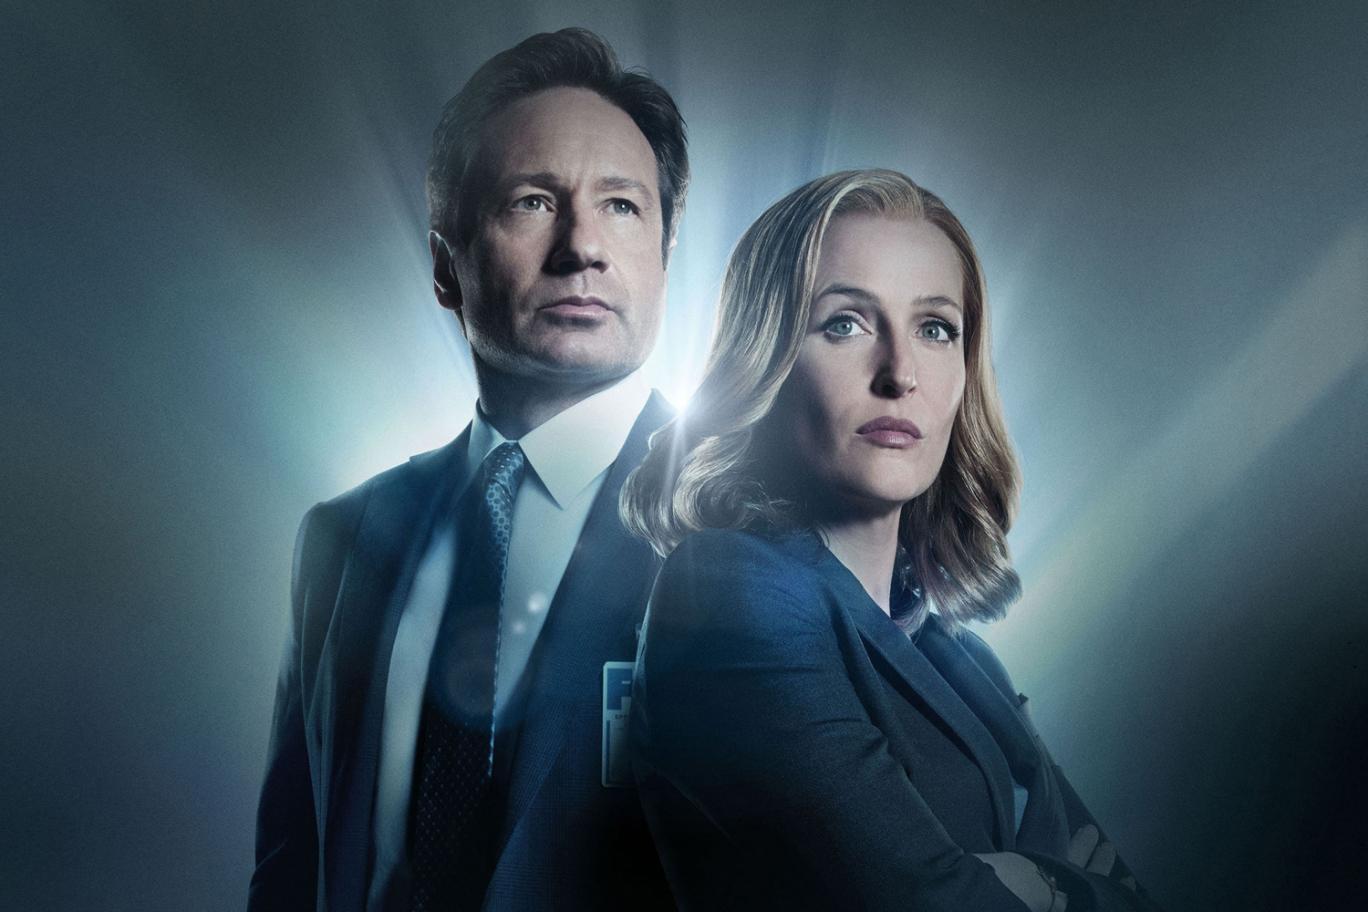 X-files will be back, but you’ll have to wait